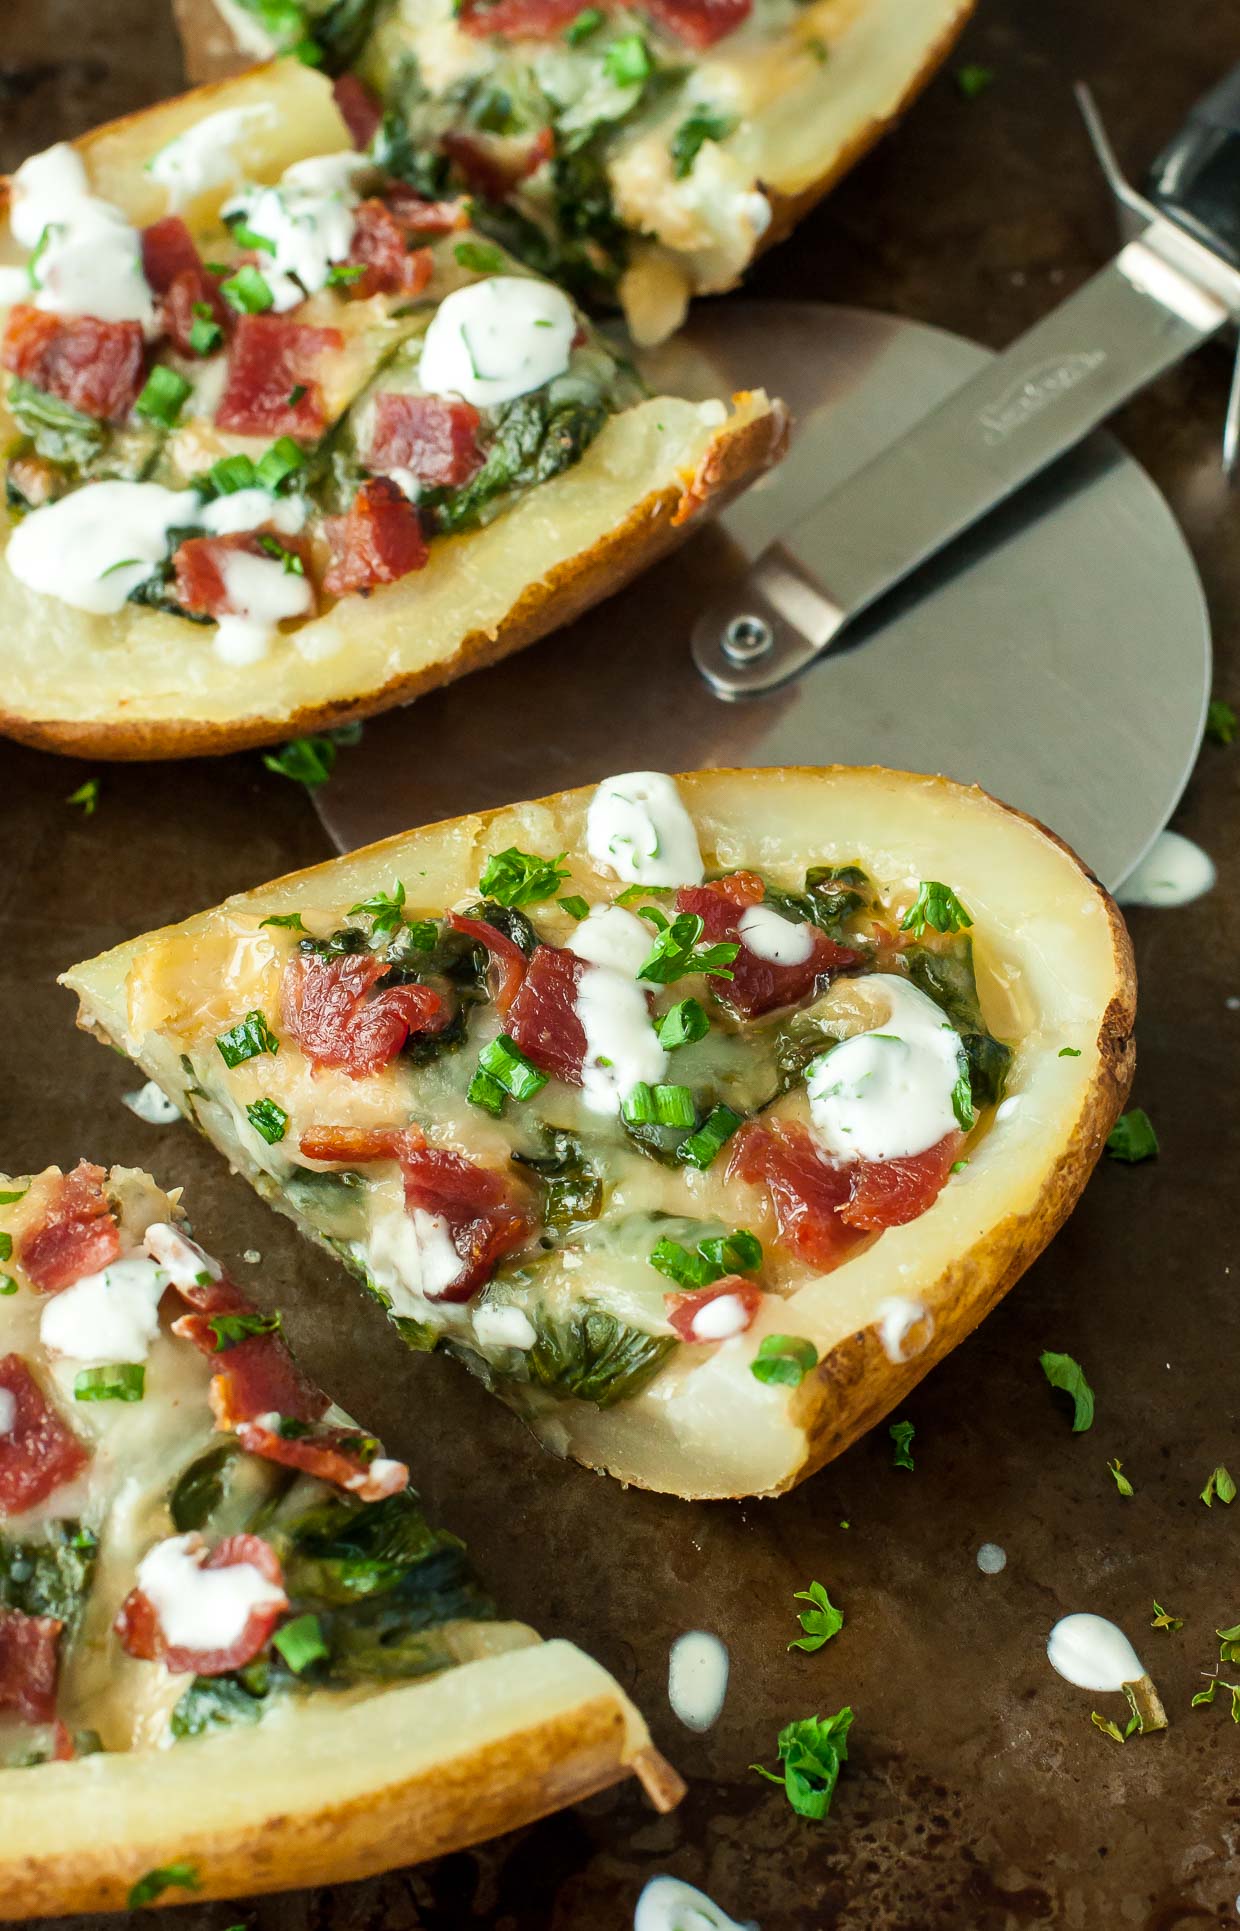 Creamy spinach artichoke dip and crispy loaded baked potato skins join forces, resulting in the ultimate party appetizer! We LOVE these spinach and artichoke loaded potato skins!